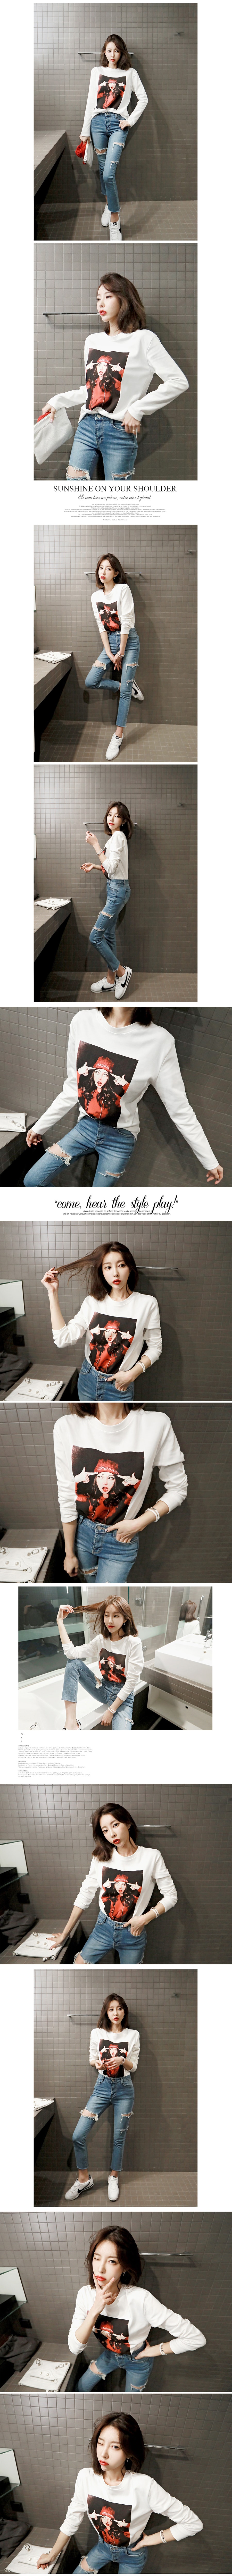 KOREA Red Beanie Girl Printed T-Shirt #Ivory One Size(S-M) [Free Shipping]